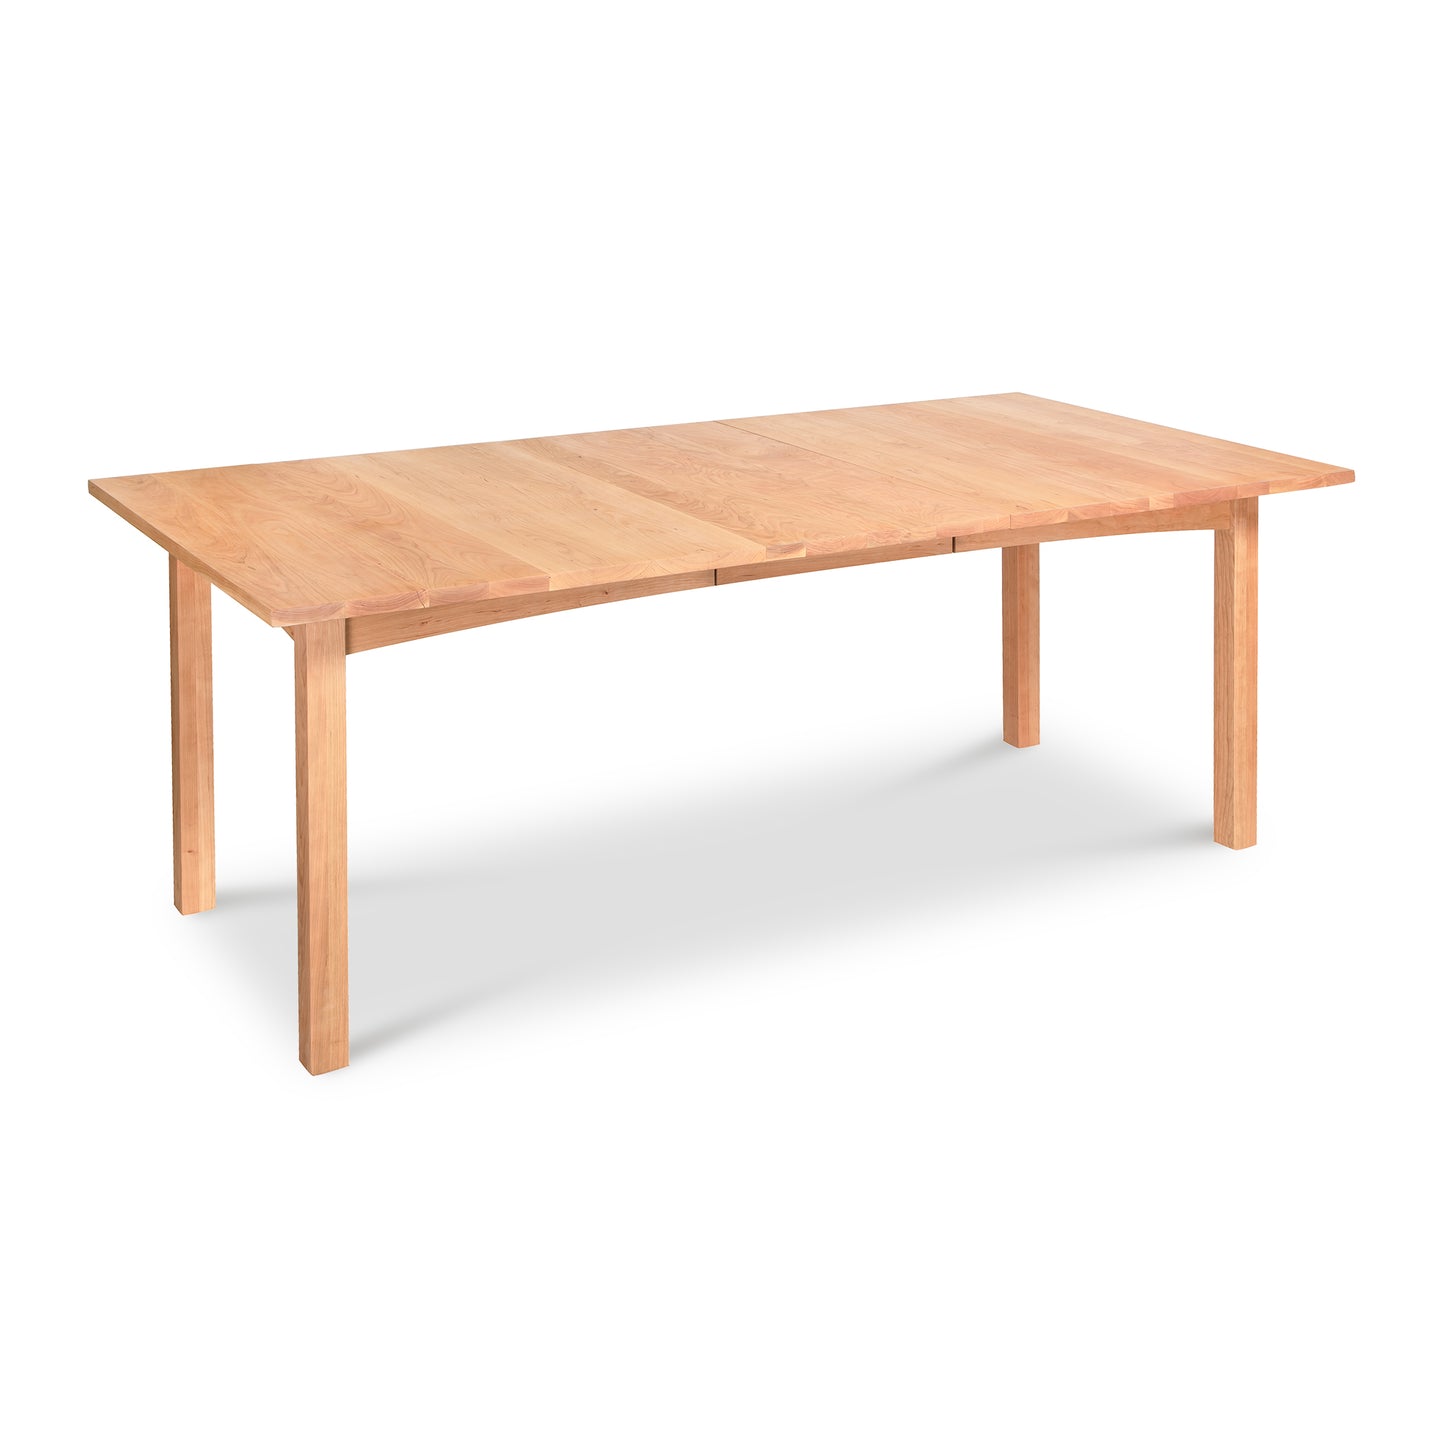 Vermont Furniture Designs Burlington Shaker Extension Dining Table isolated on a white background.